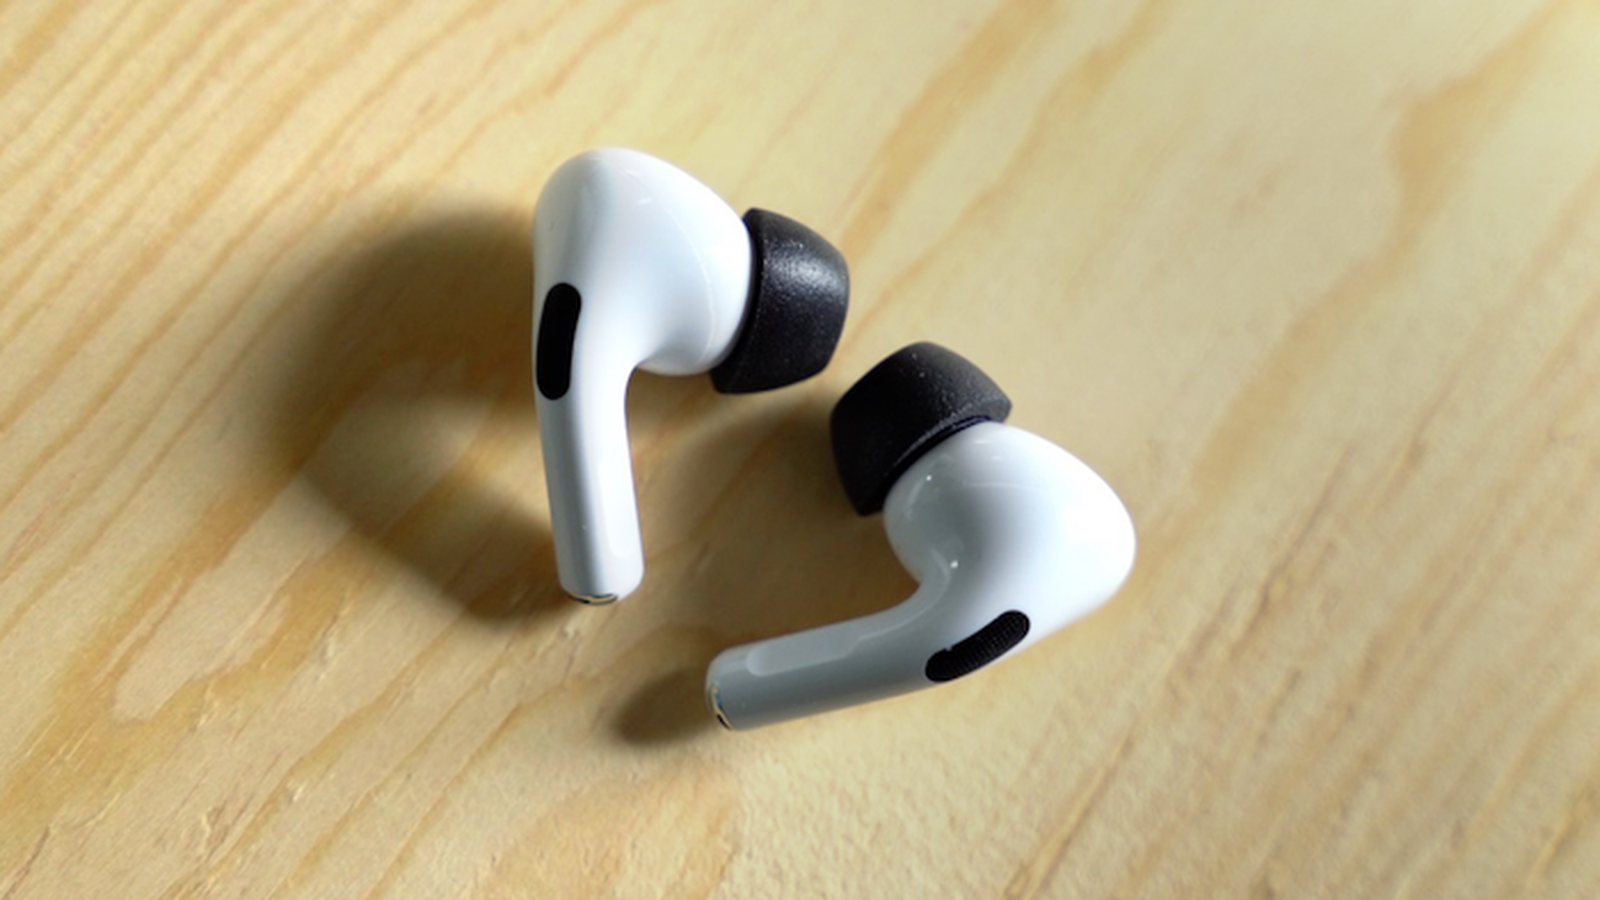 Forskellige Svinde bort nummer Hands-On With Comply's Foam Tips for AirPods Pro - MacRumors